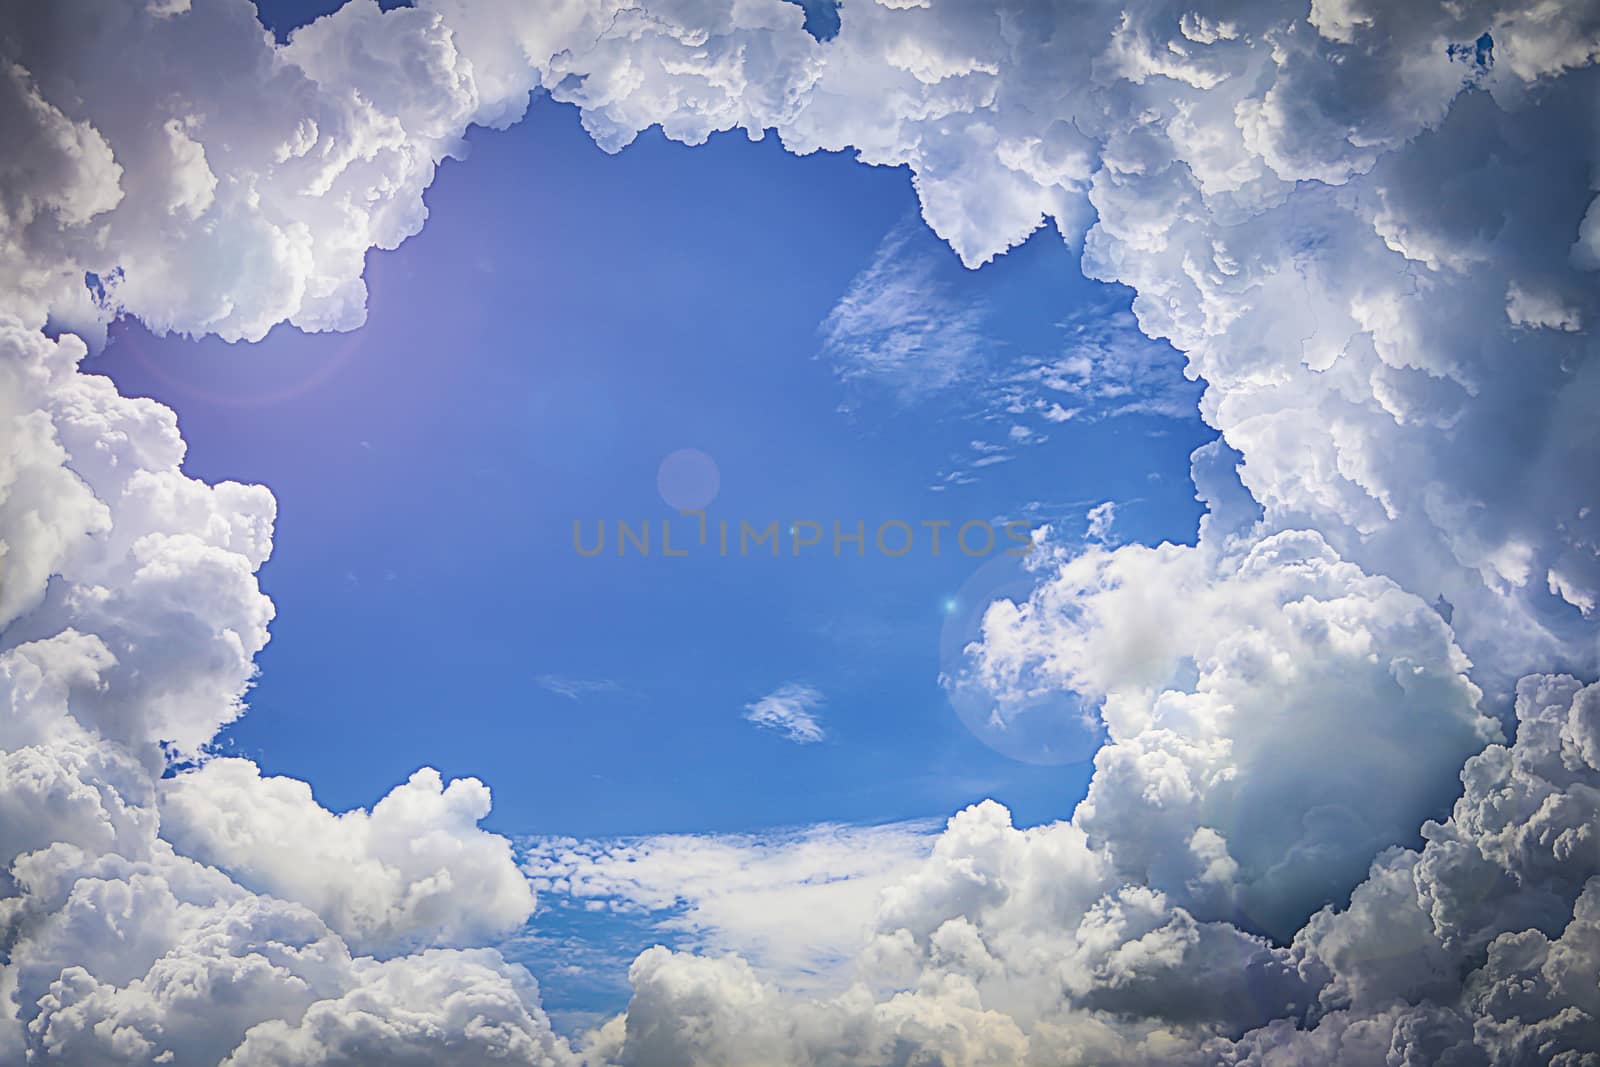 Image to create by blending cloudy multi layer in software